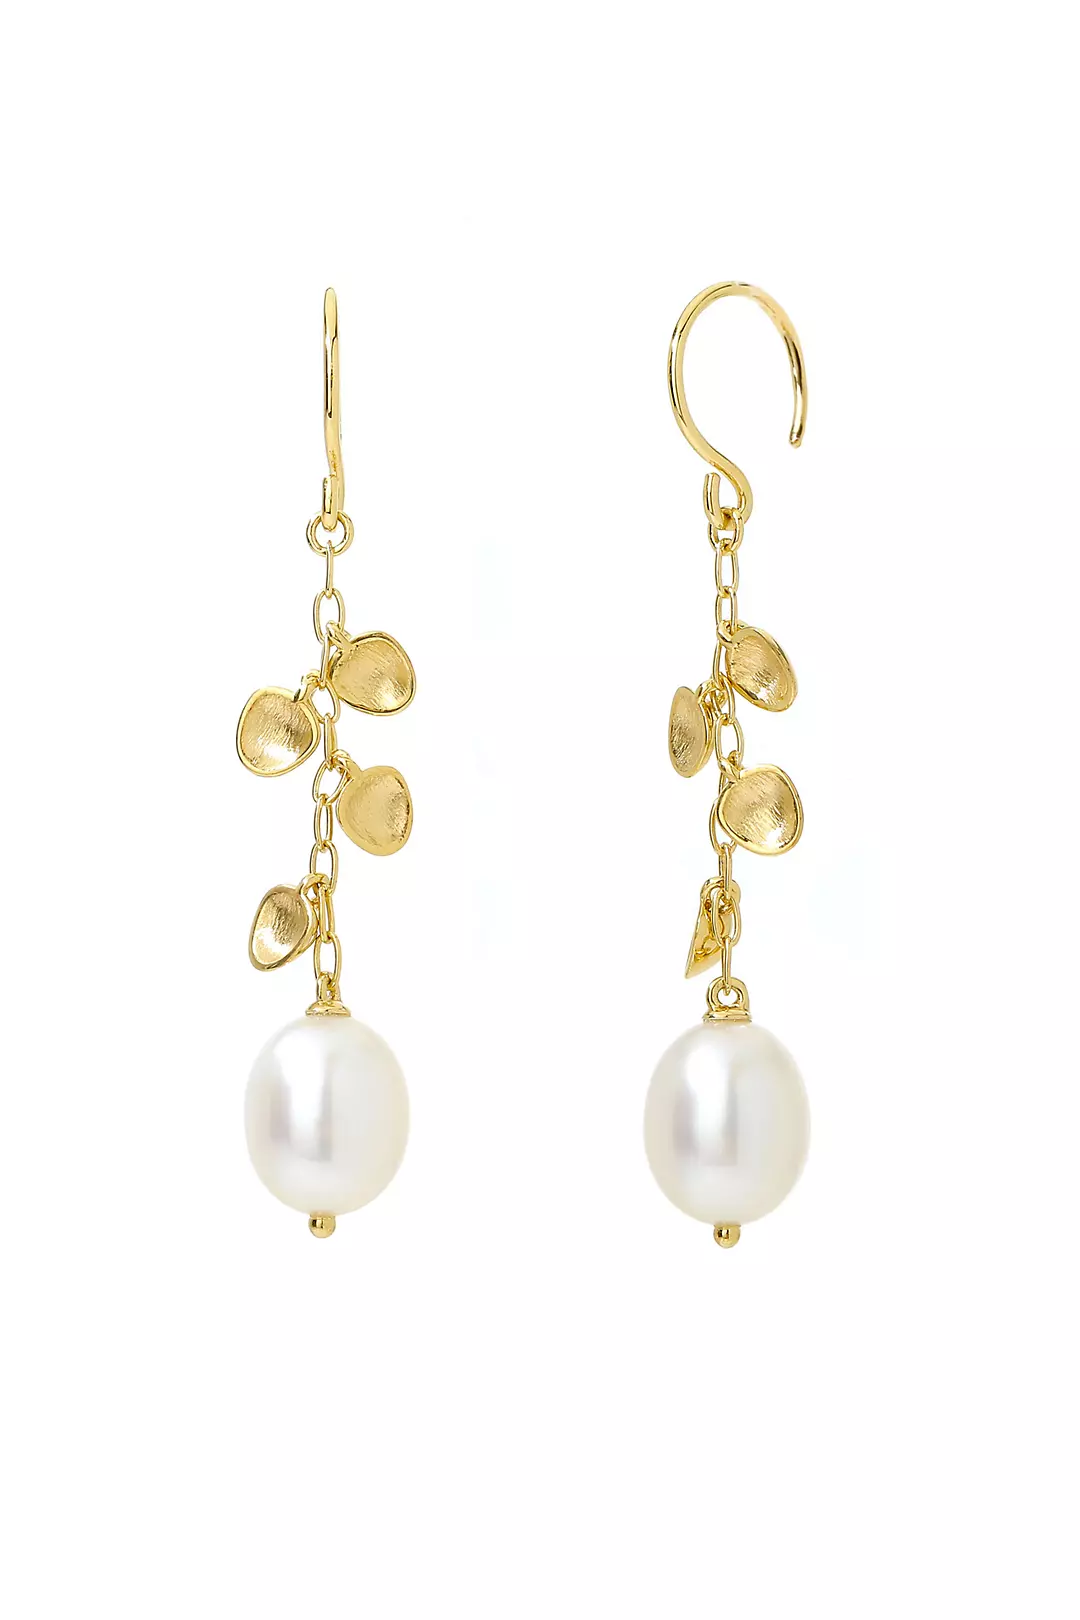 18k Gold and Freshwater Pearl Dangle Earrings Image 1